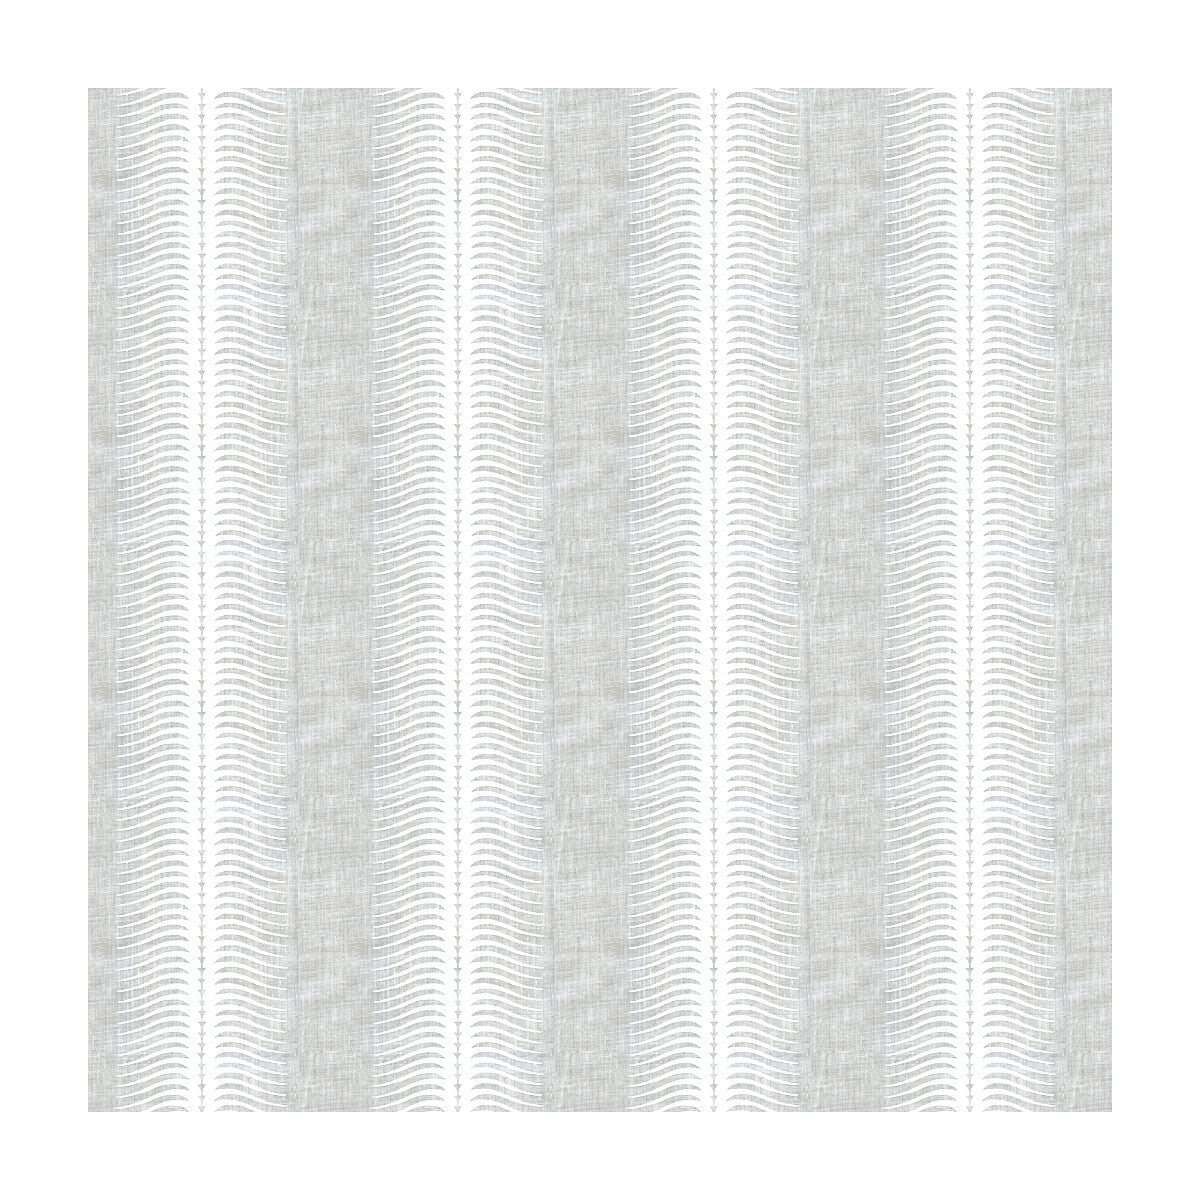 Stripes fabric in white voile color - pattern GWF-3508.101.0 - by Lee Jofa Modern in the Allegra Hicks Garden collection